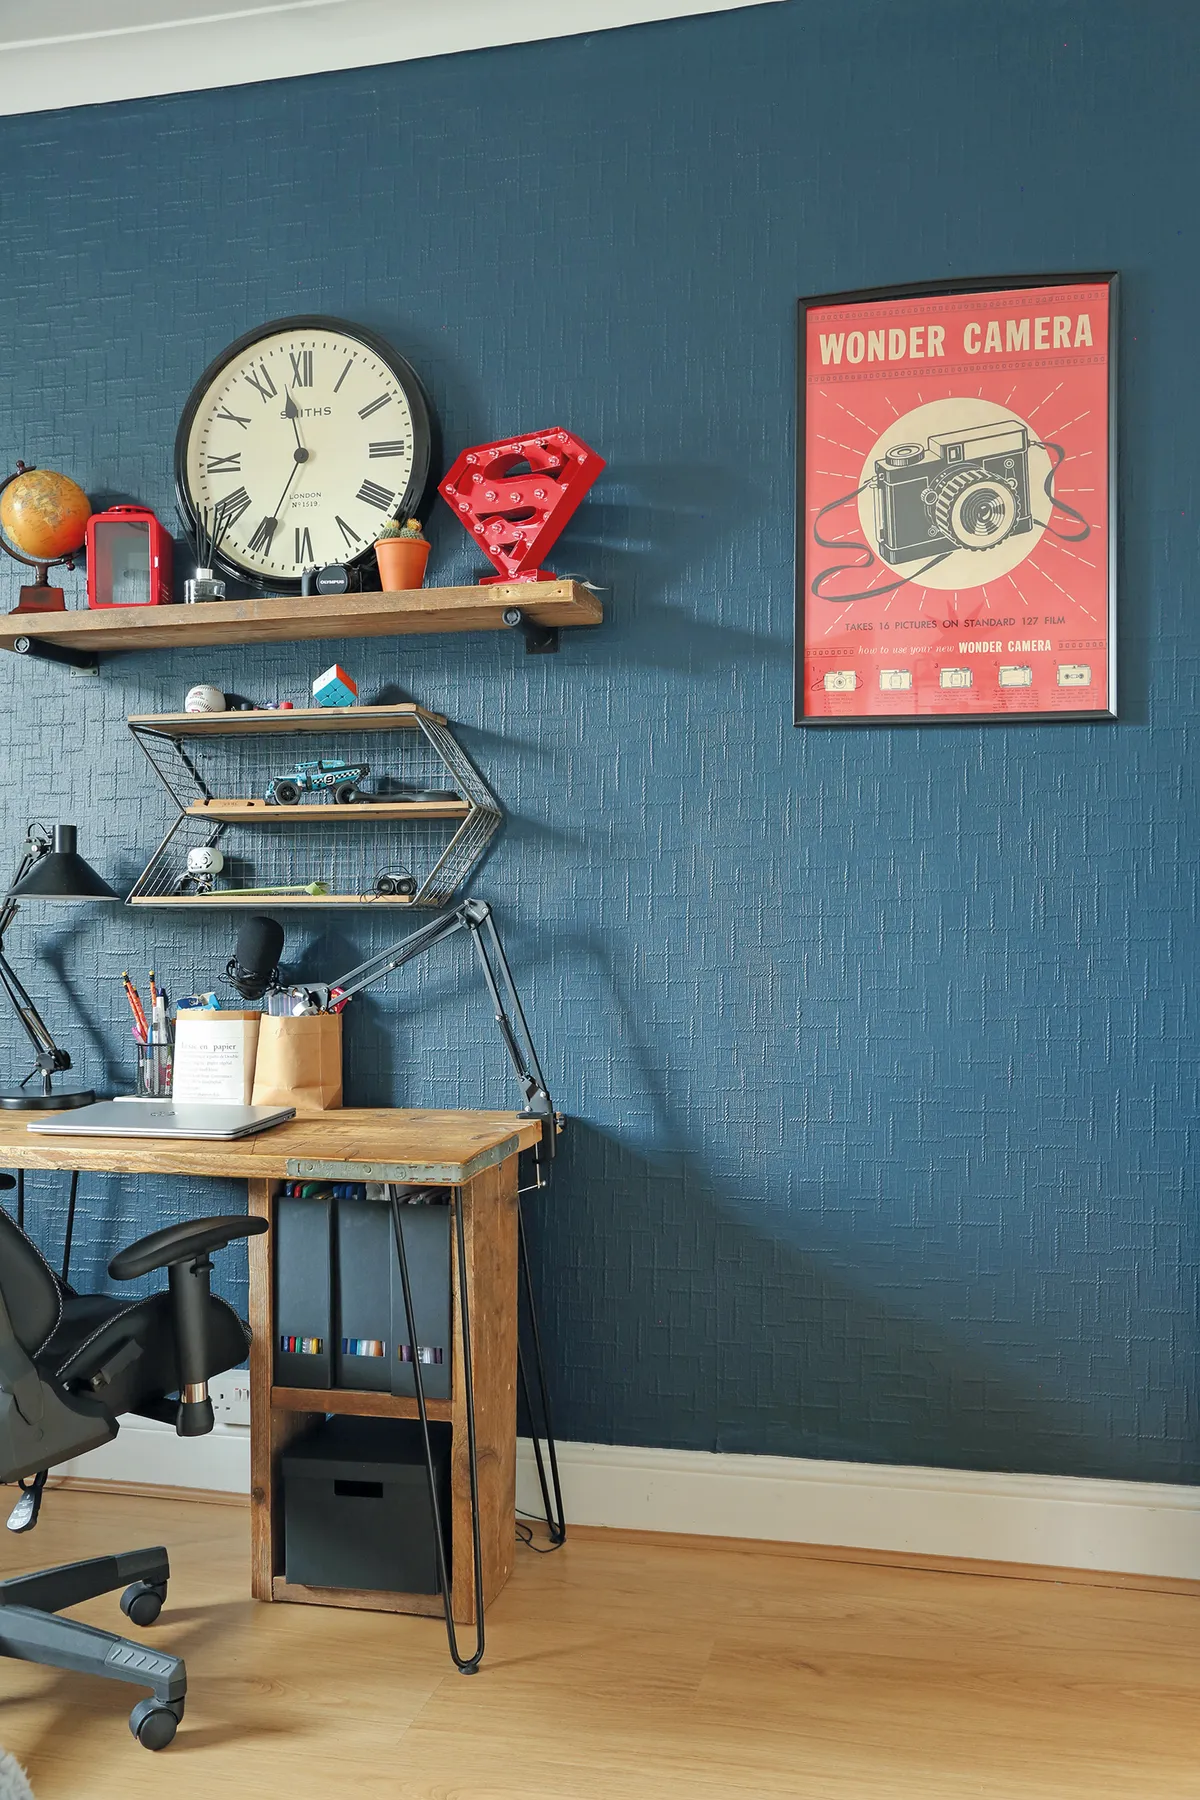 Not unlike the rest of the flat, David’s bedroom is full of repurposed finds and handmade treasures, such as the desk that Tomasz mad